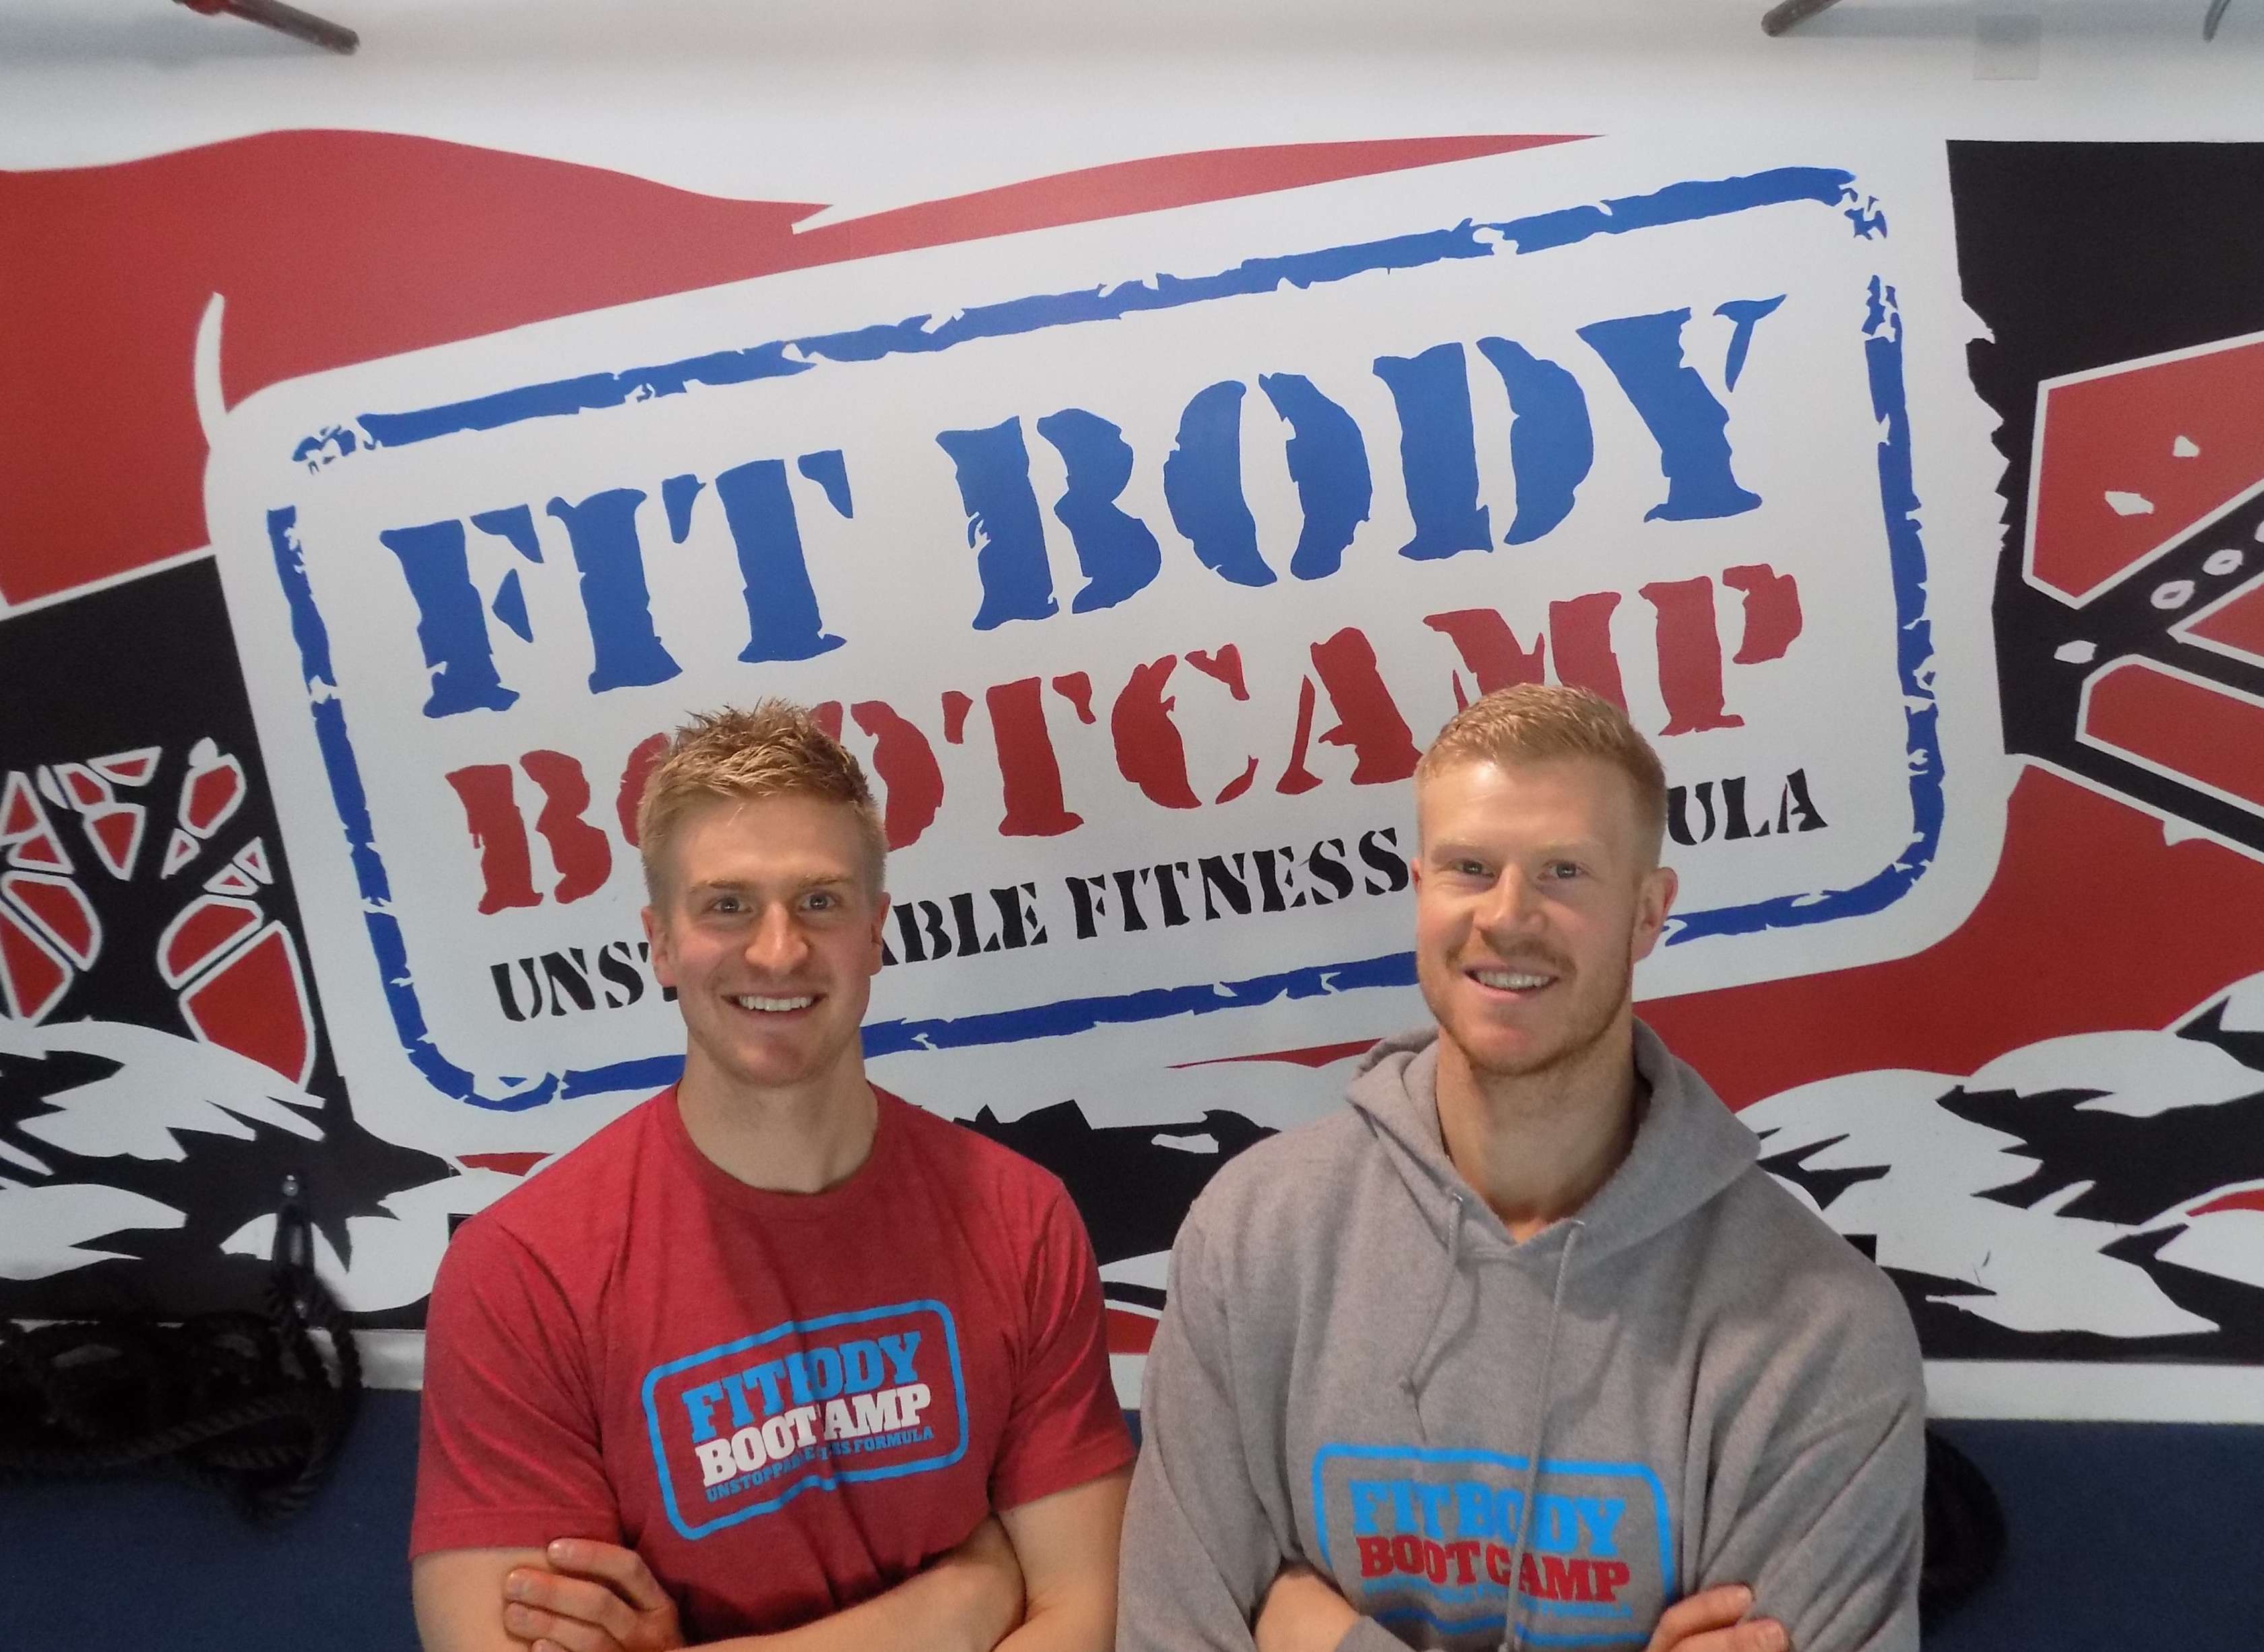 Fitbody Boot Camp About Owner